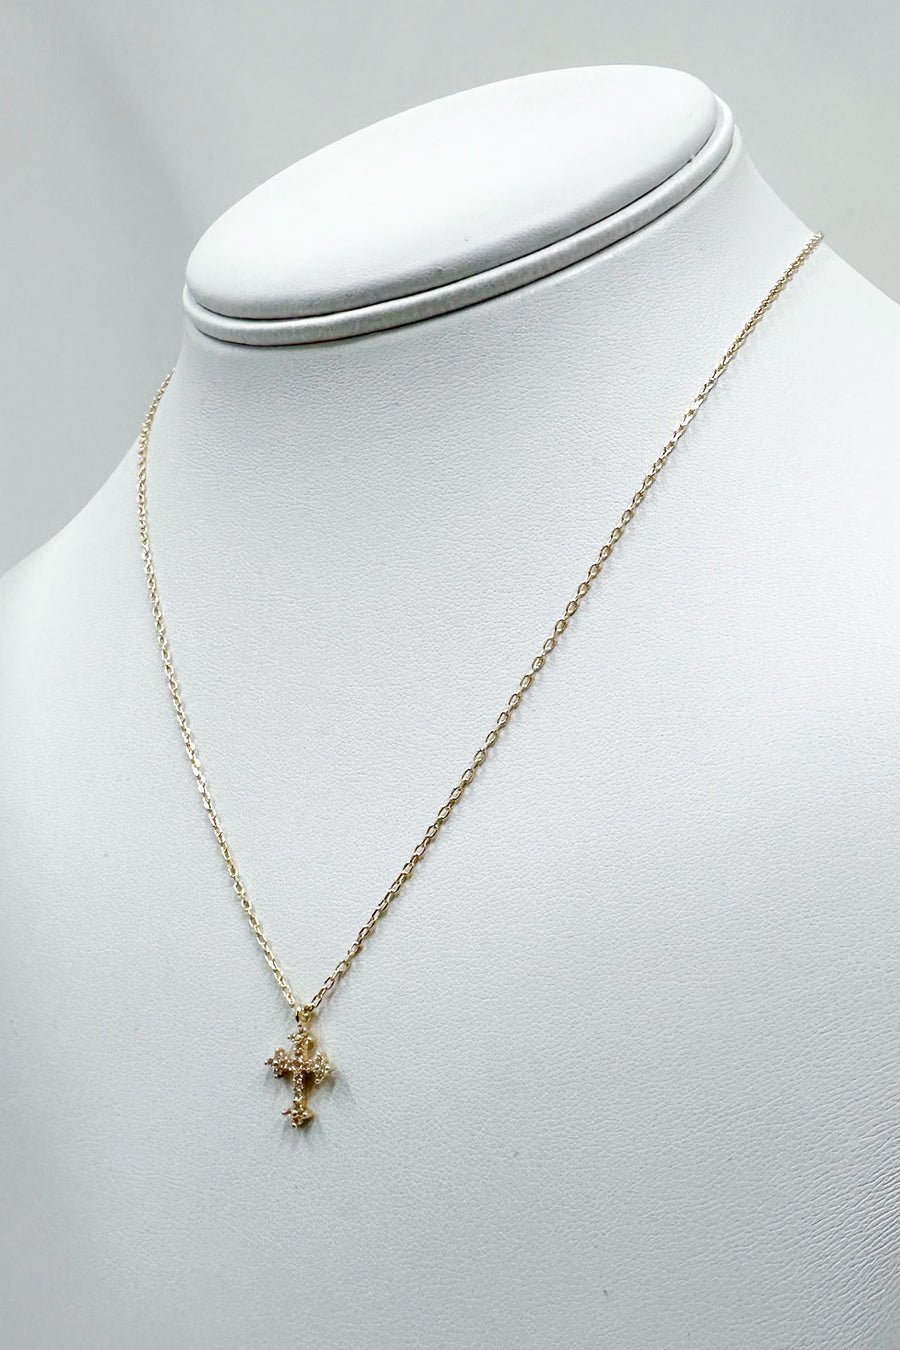 Gold Salena Crystal Cross Necklace - Madison and Mallory